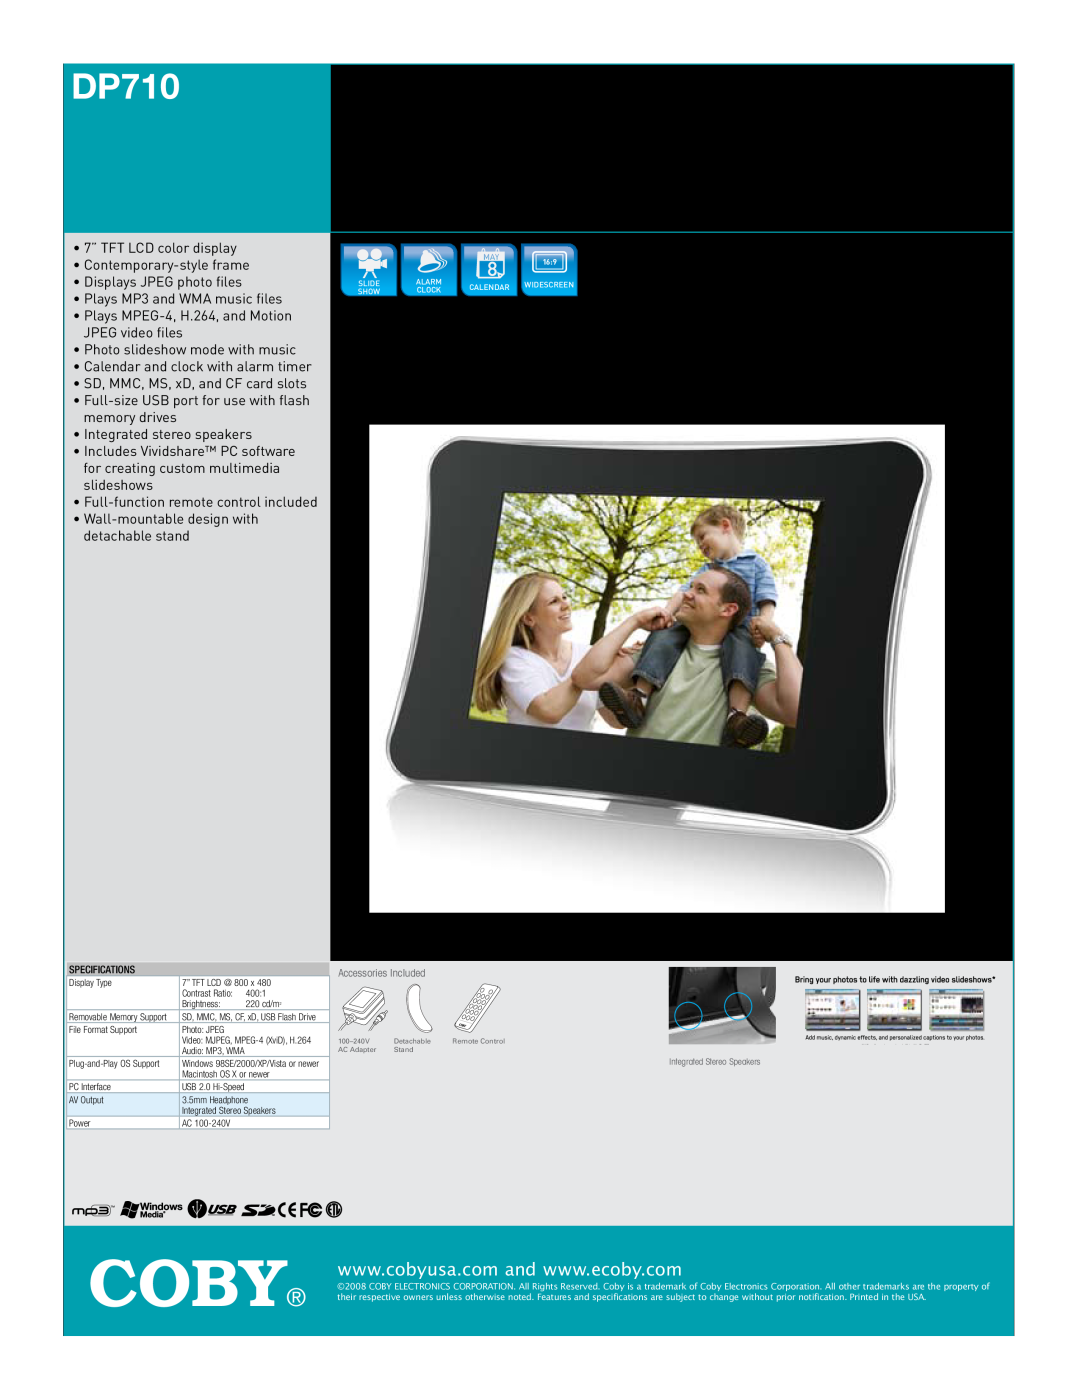 COBY electronic DP710 specifications Coby, 7” WIDESCREEN DIGITAL PHOTO FRAME with MULTIMEDIA PLAYBACK 